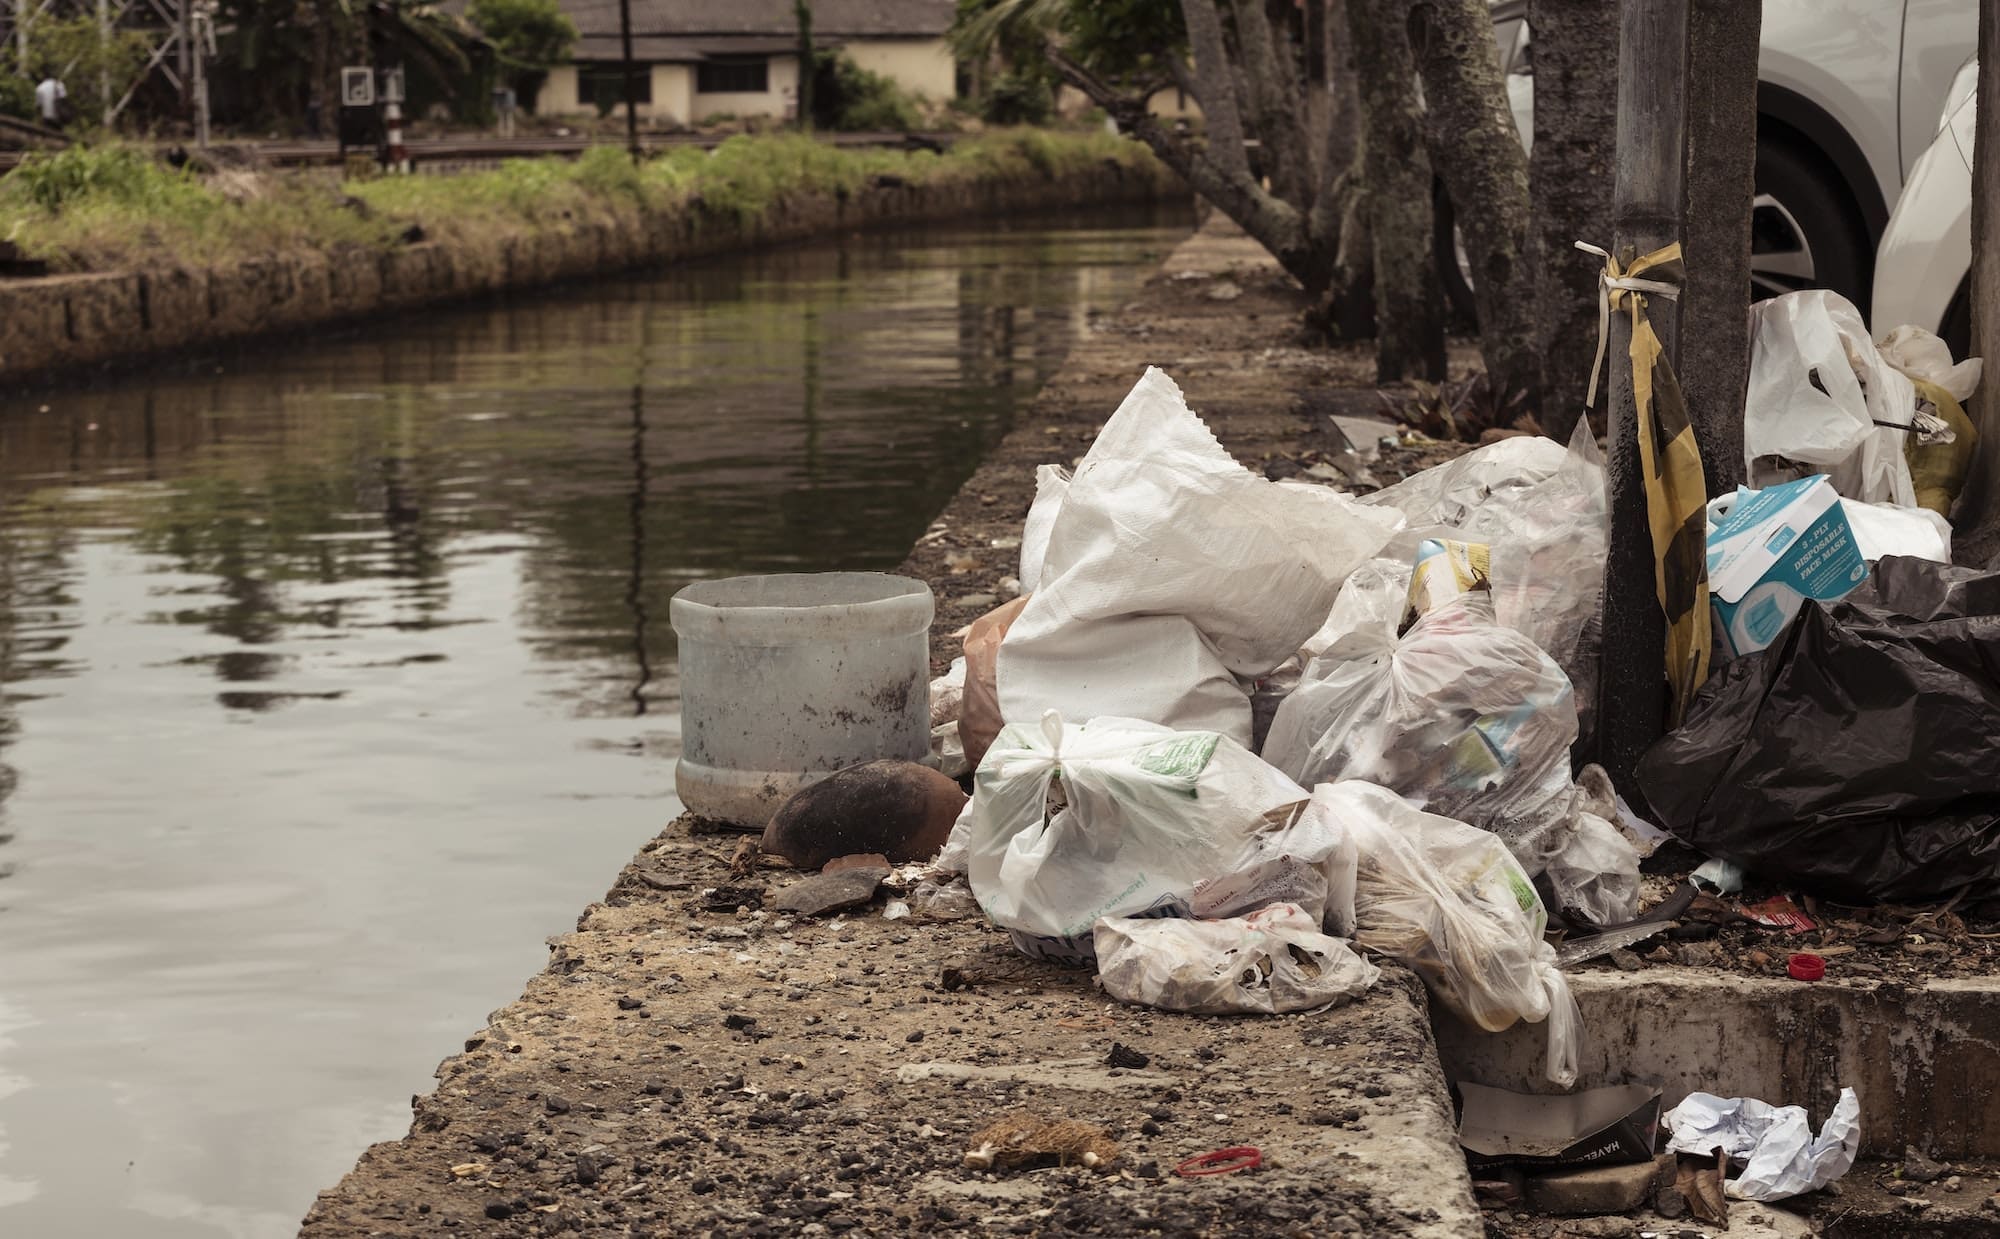 Pile of polythene bags and trash in the streets near a lake.